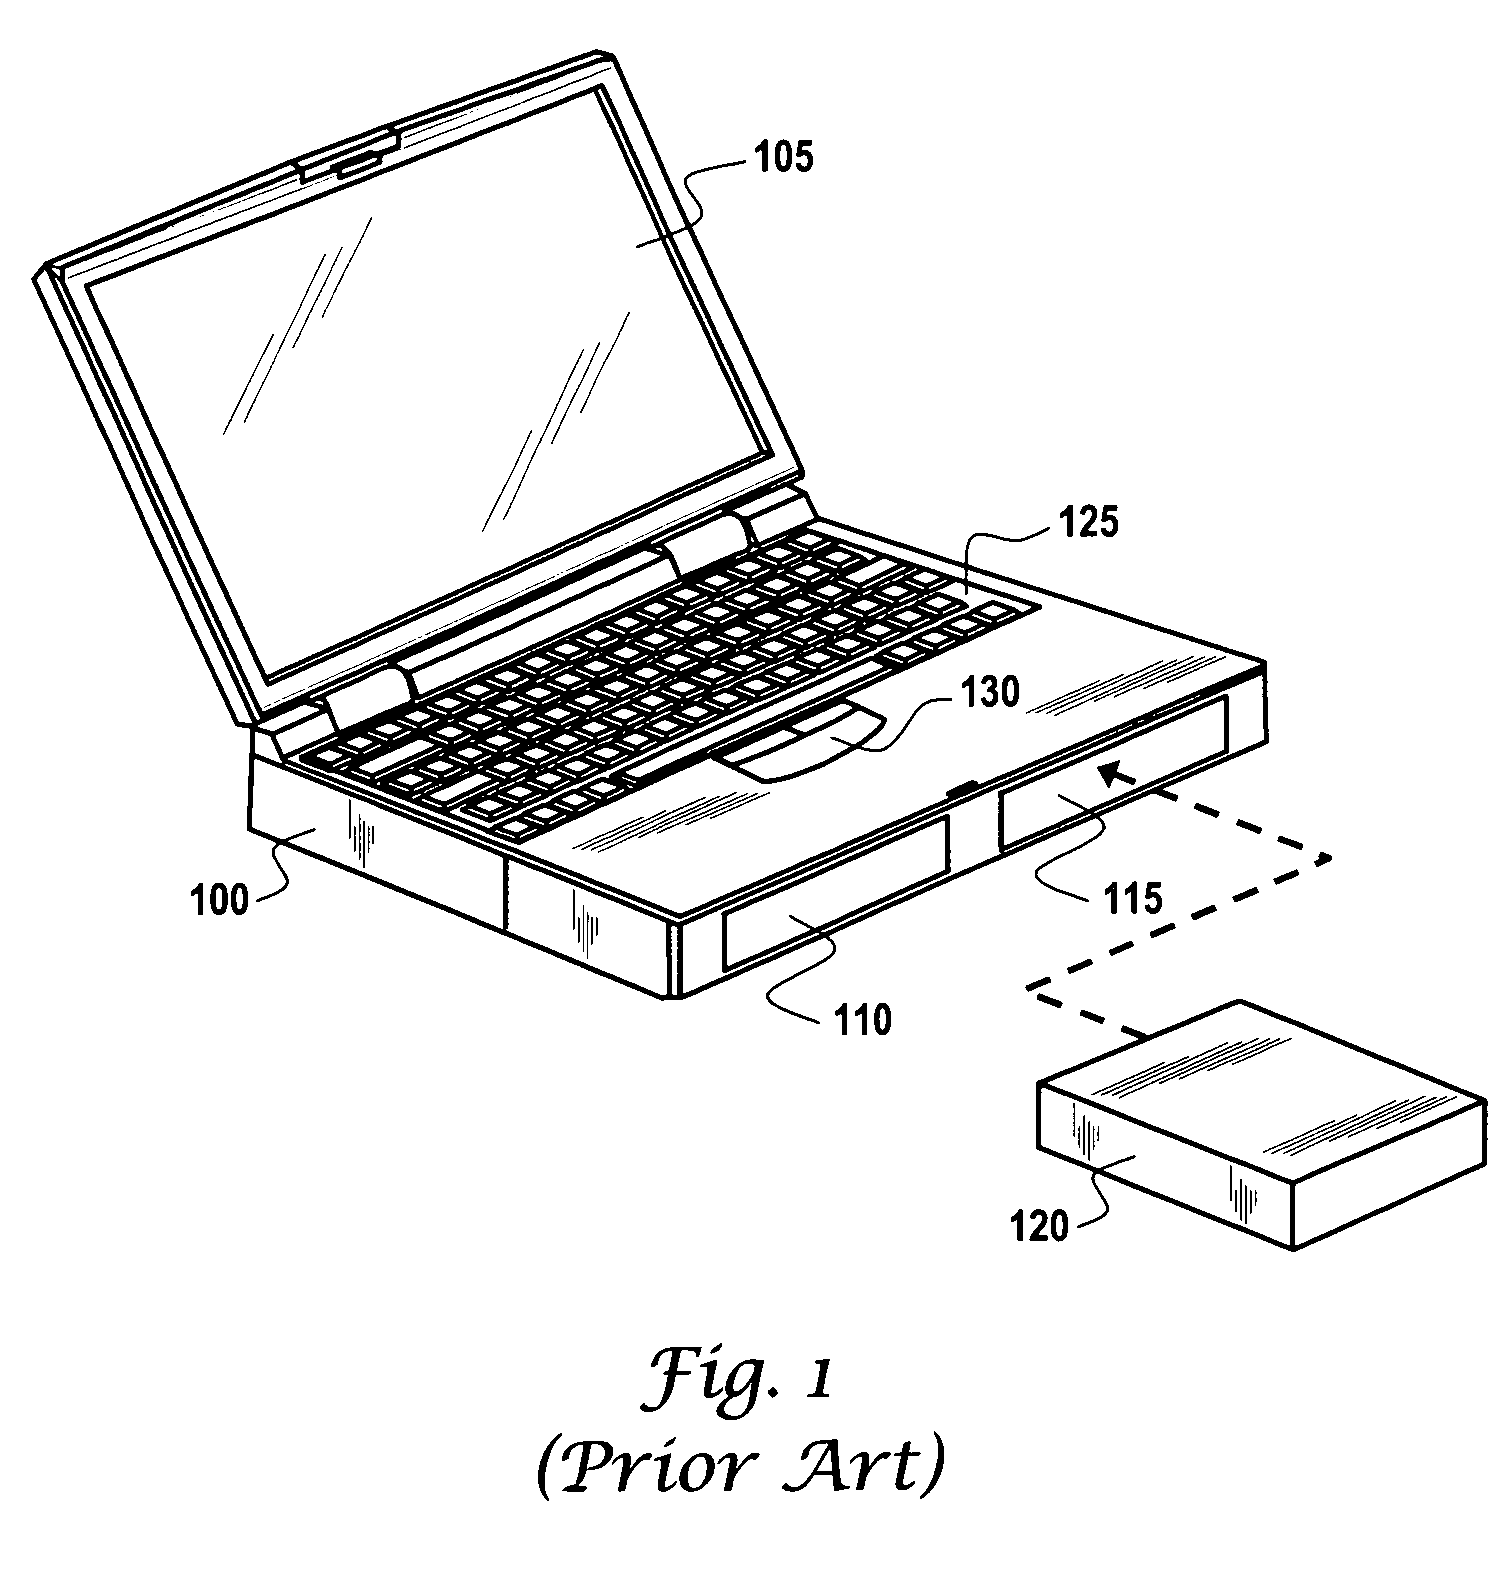 Removable personal digital assistant in a dual personal computer/personal digital assistant computer architecture